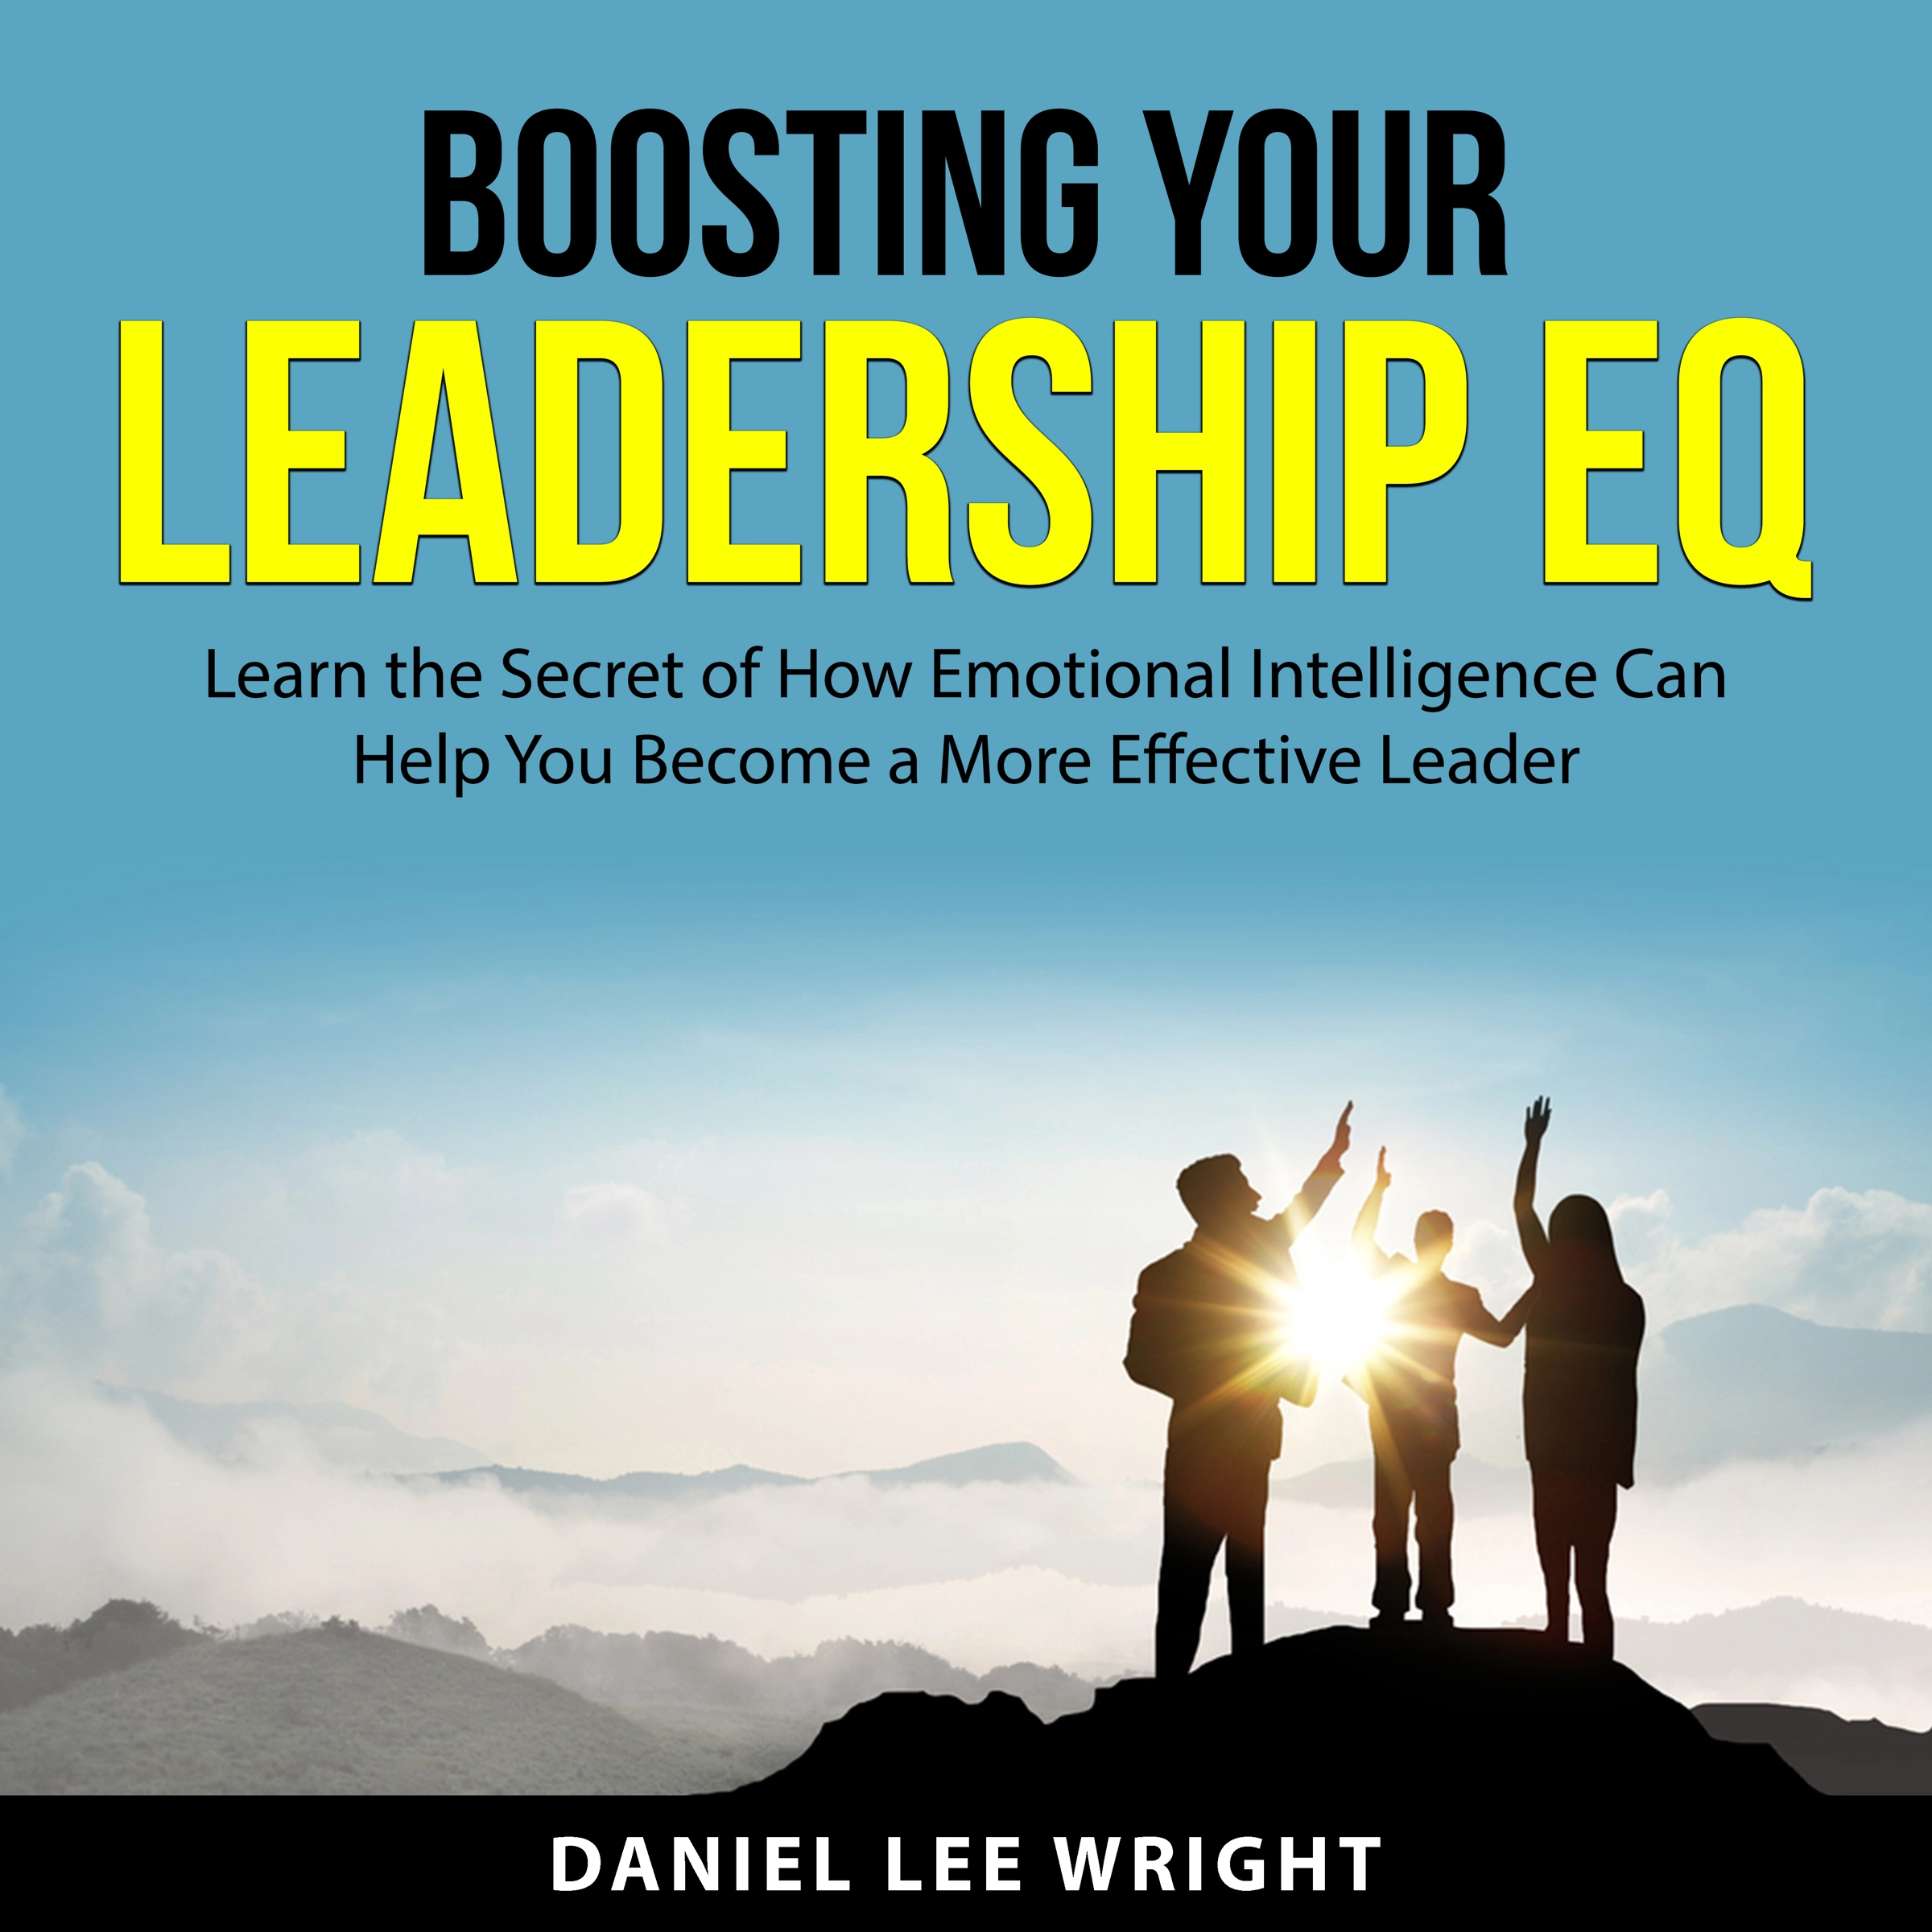 Boosting Your Leadership EQ Audiobook by Daniel Lee Wright